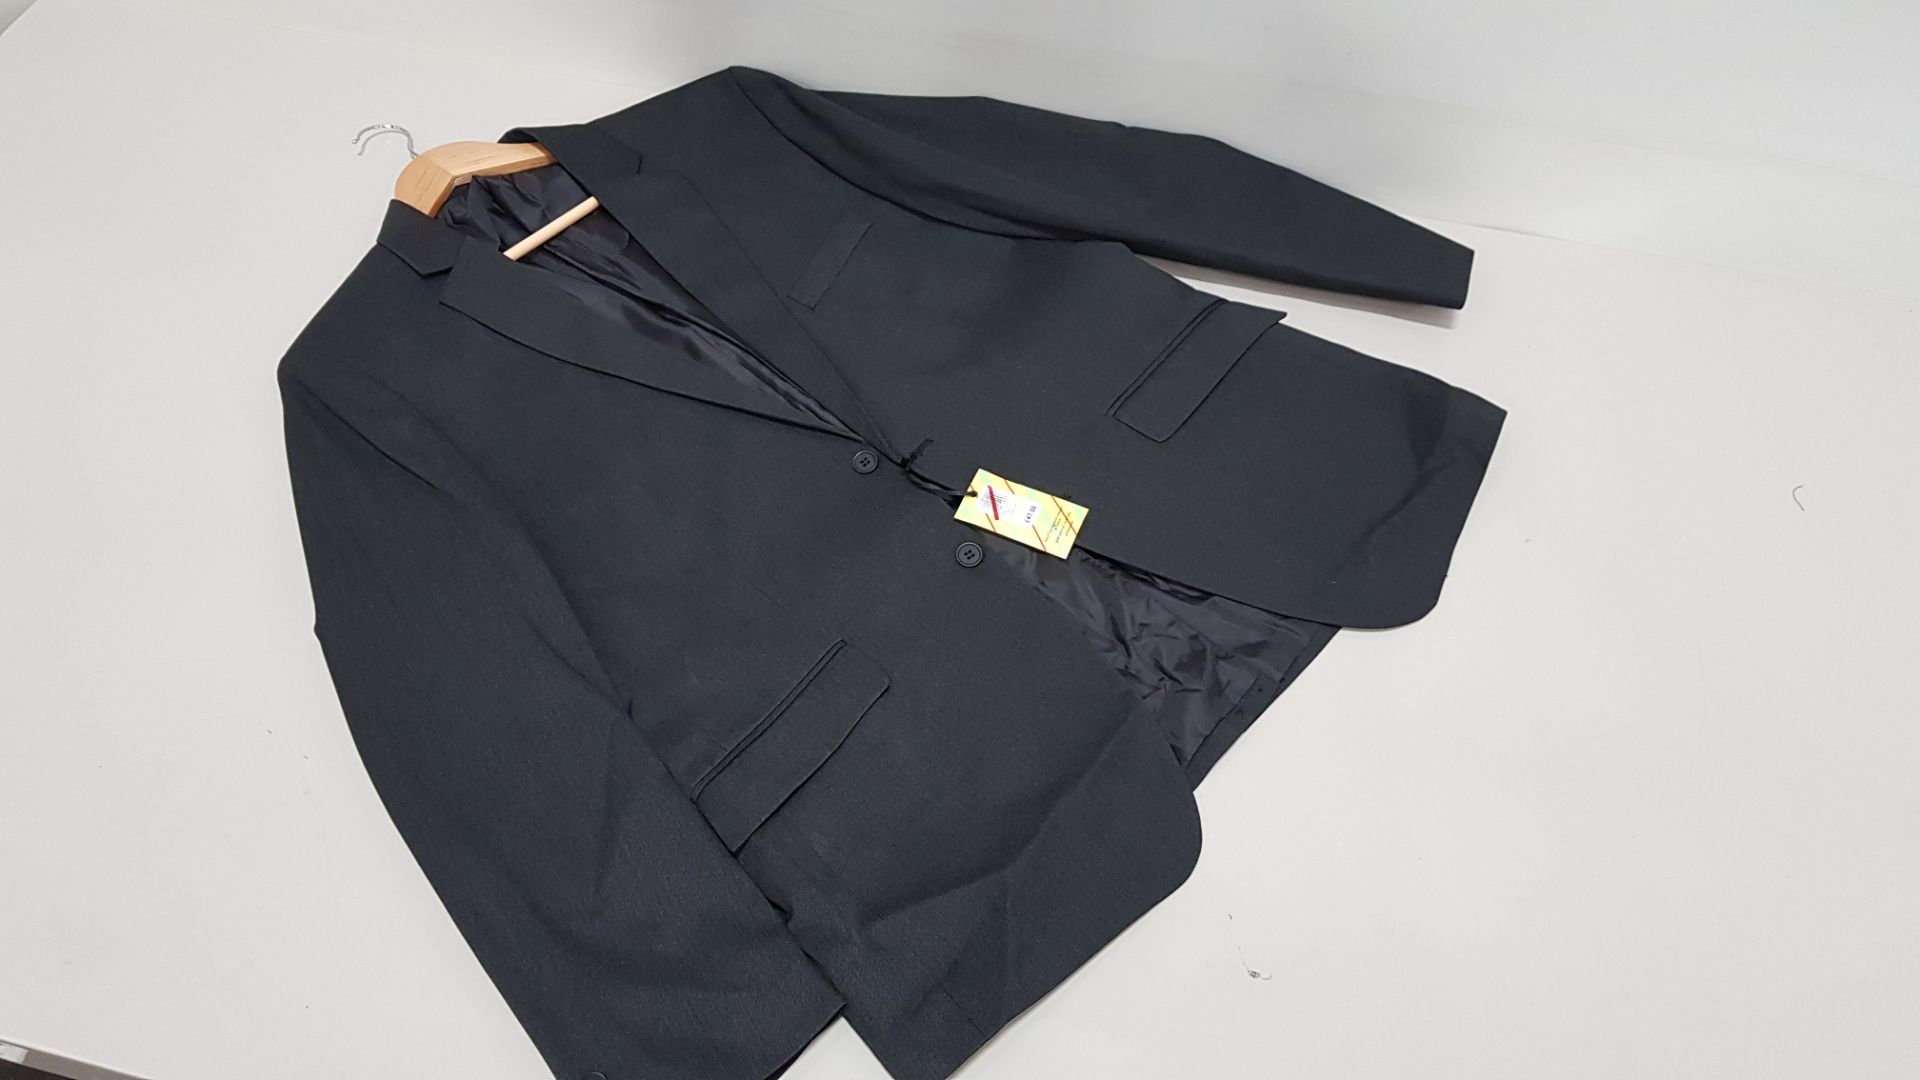 7 X BRAND NEW JOHN LEWIS SMART SIXTH FORM CHARCOAL JACKETS SIZE 44 RRP £47.00 (TOTAL RRP £329.00)